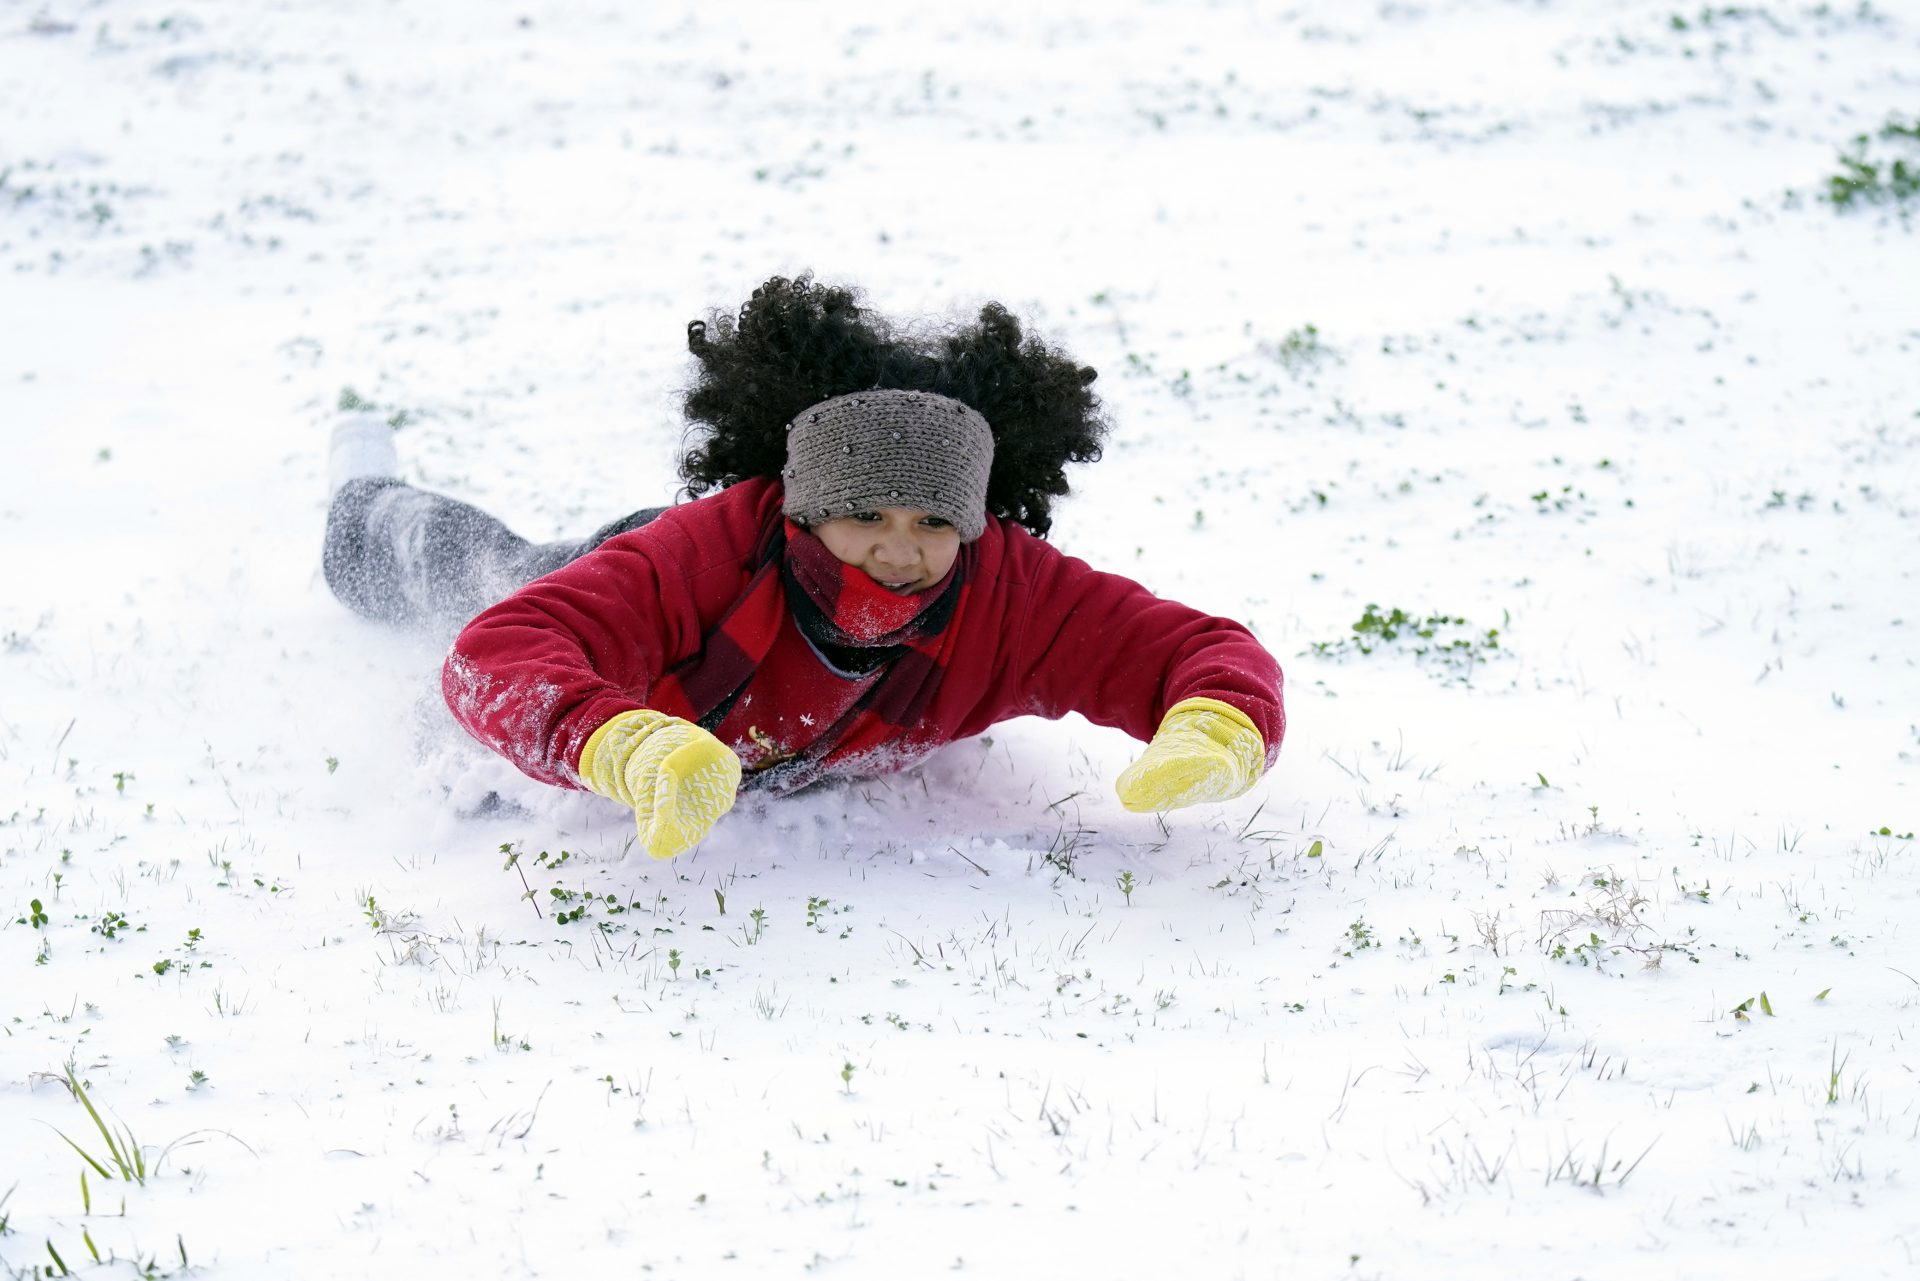 Alyssa Remi, 12, slides down a snow covered hill Monday, Feb. 15, 2021, in Houston.A winter storm dropping snow and ice sent temperatures plunging across the southern Plains, prompting a power emergency in Texas a day after conditions canceled flights and impacted traffic across large swaths of the U.S.